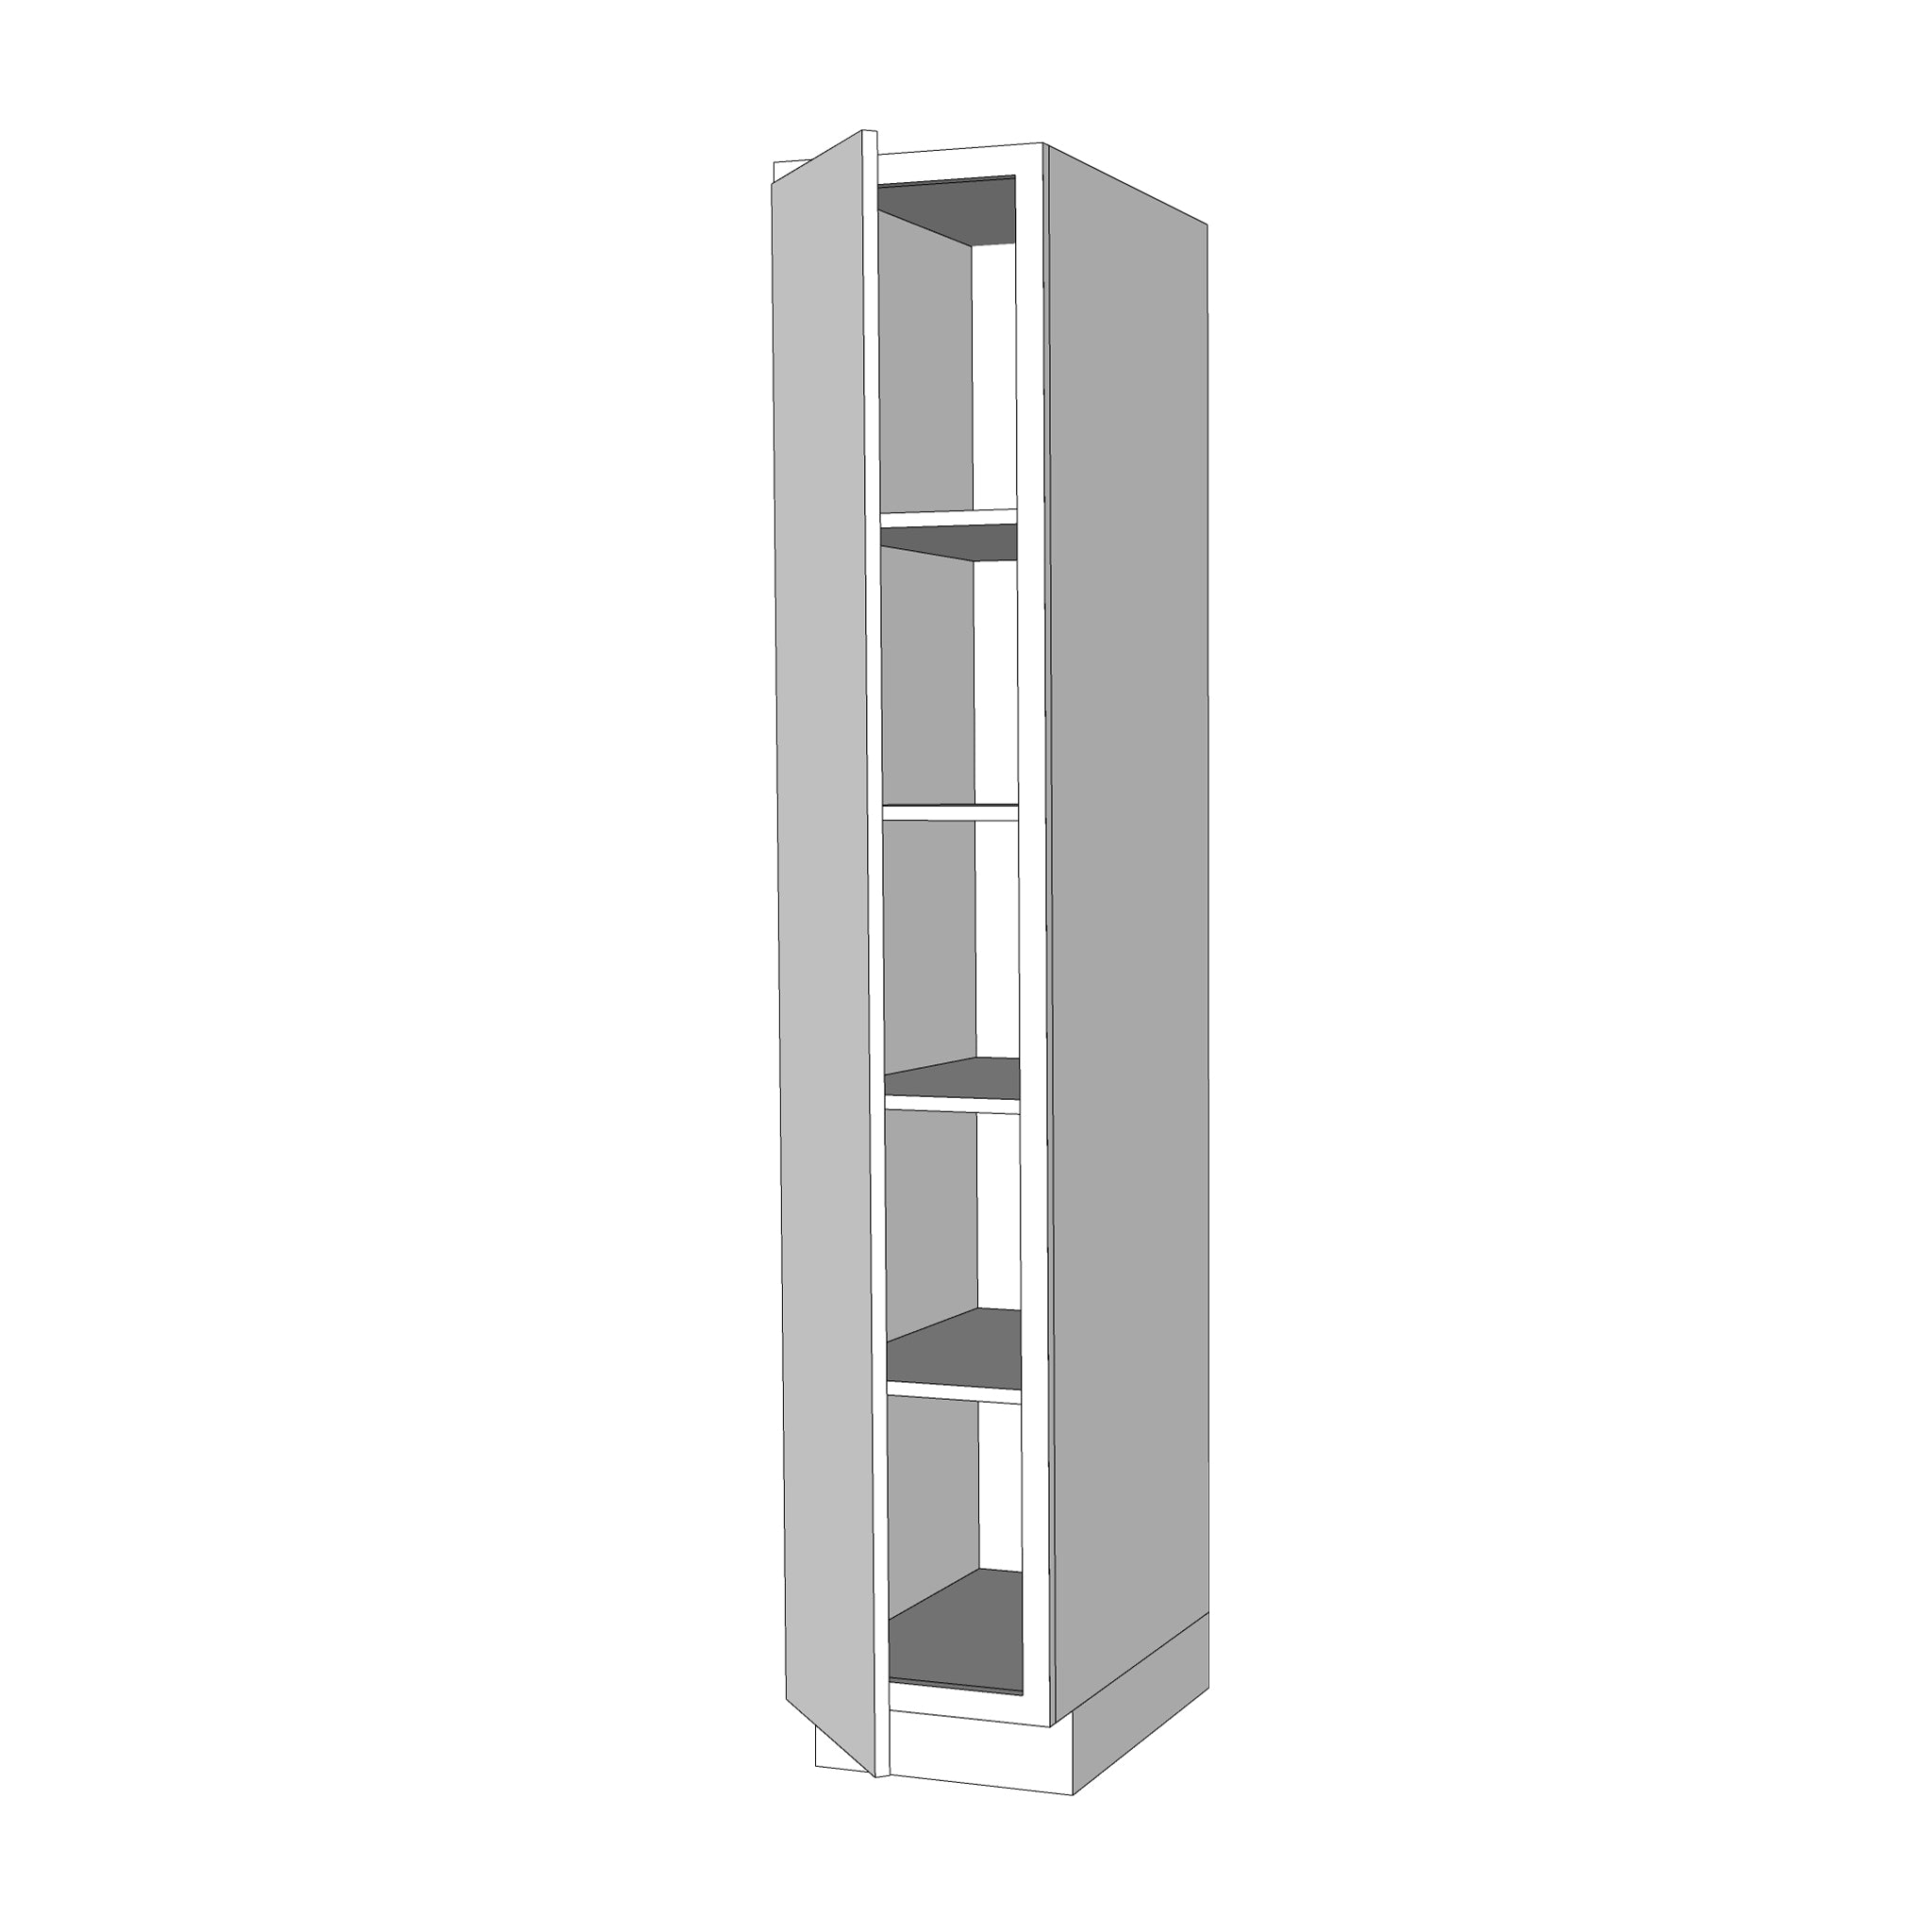 15x84 High Pantry Cabinet - Assembled